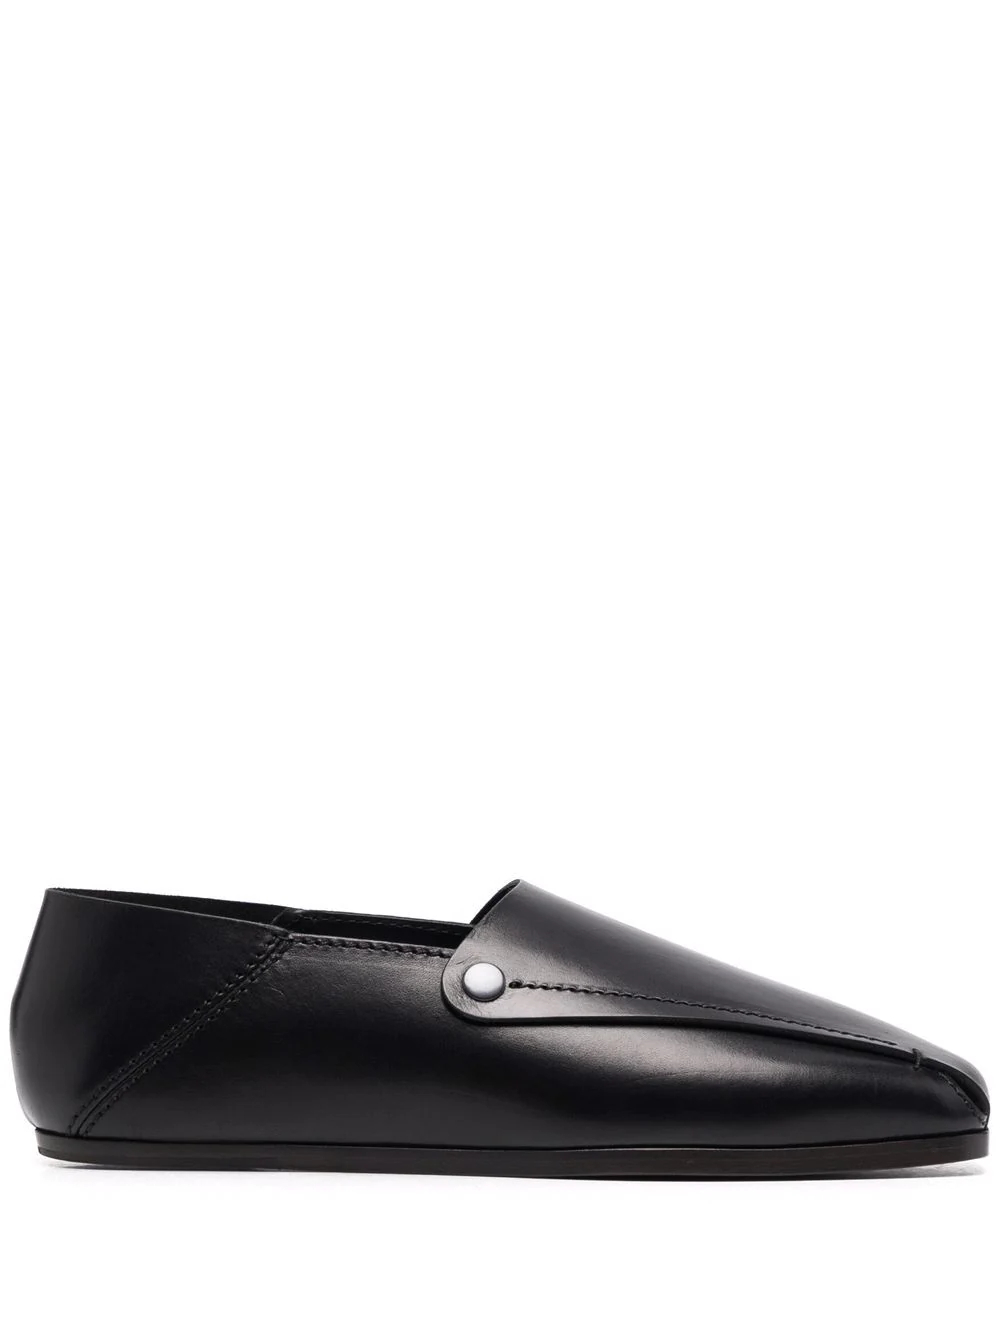 LEMAIRE LOAFERS WITH SQUARE TOE